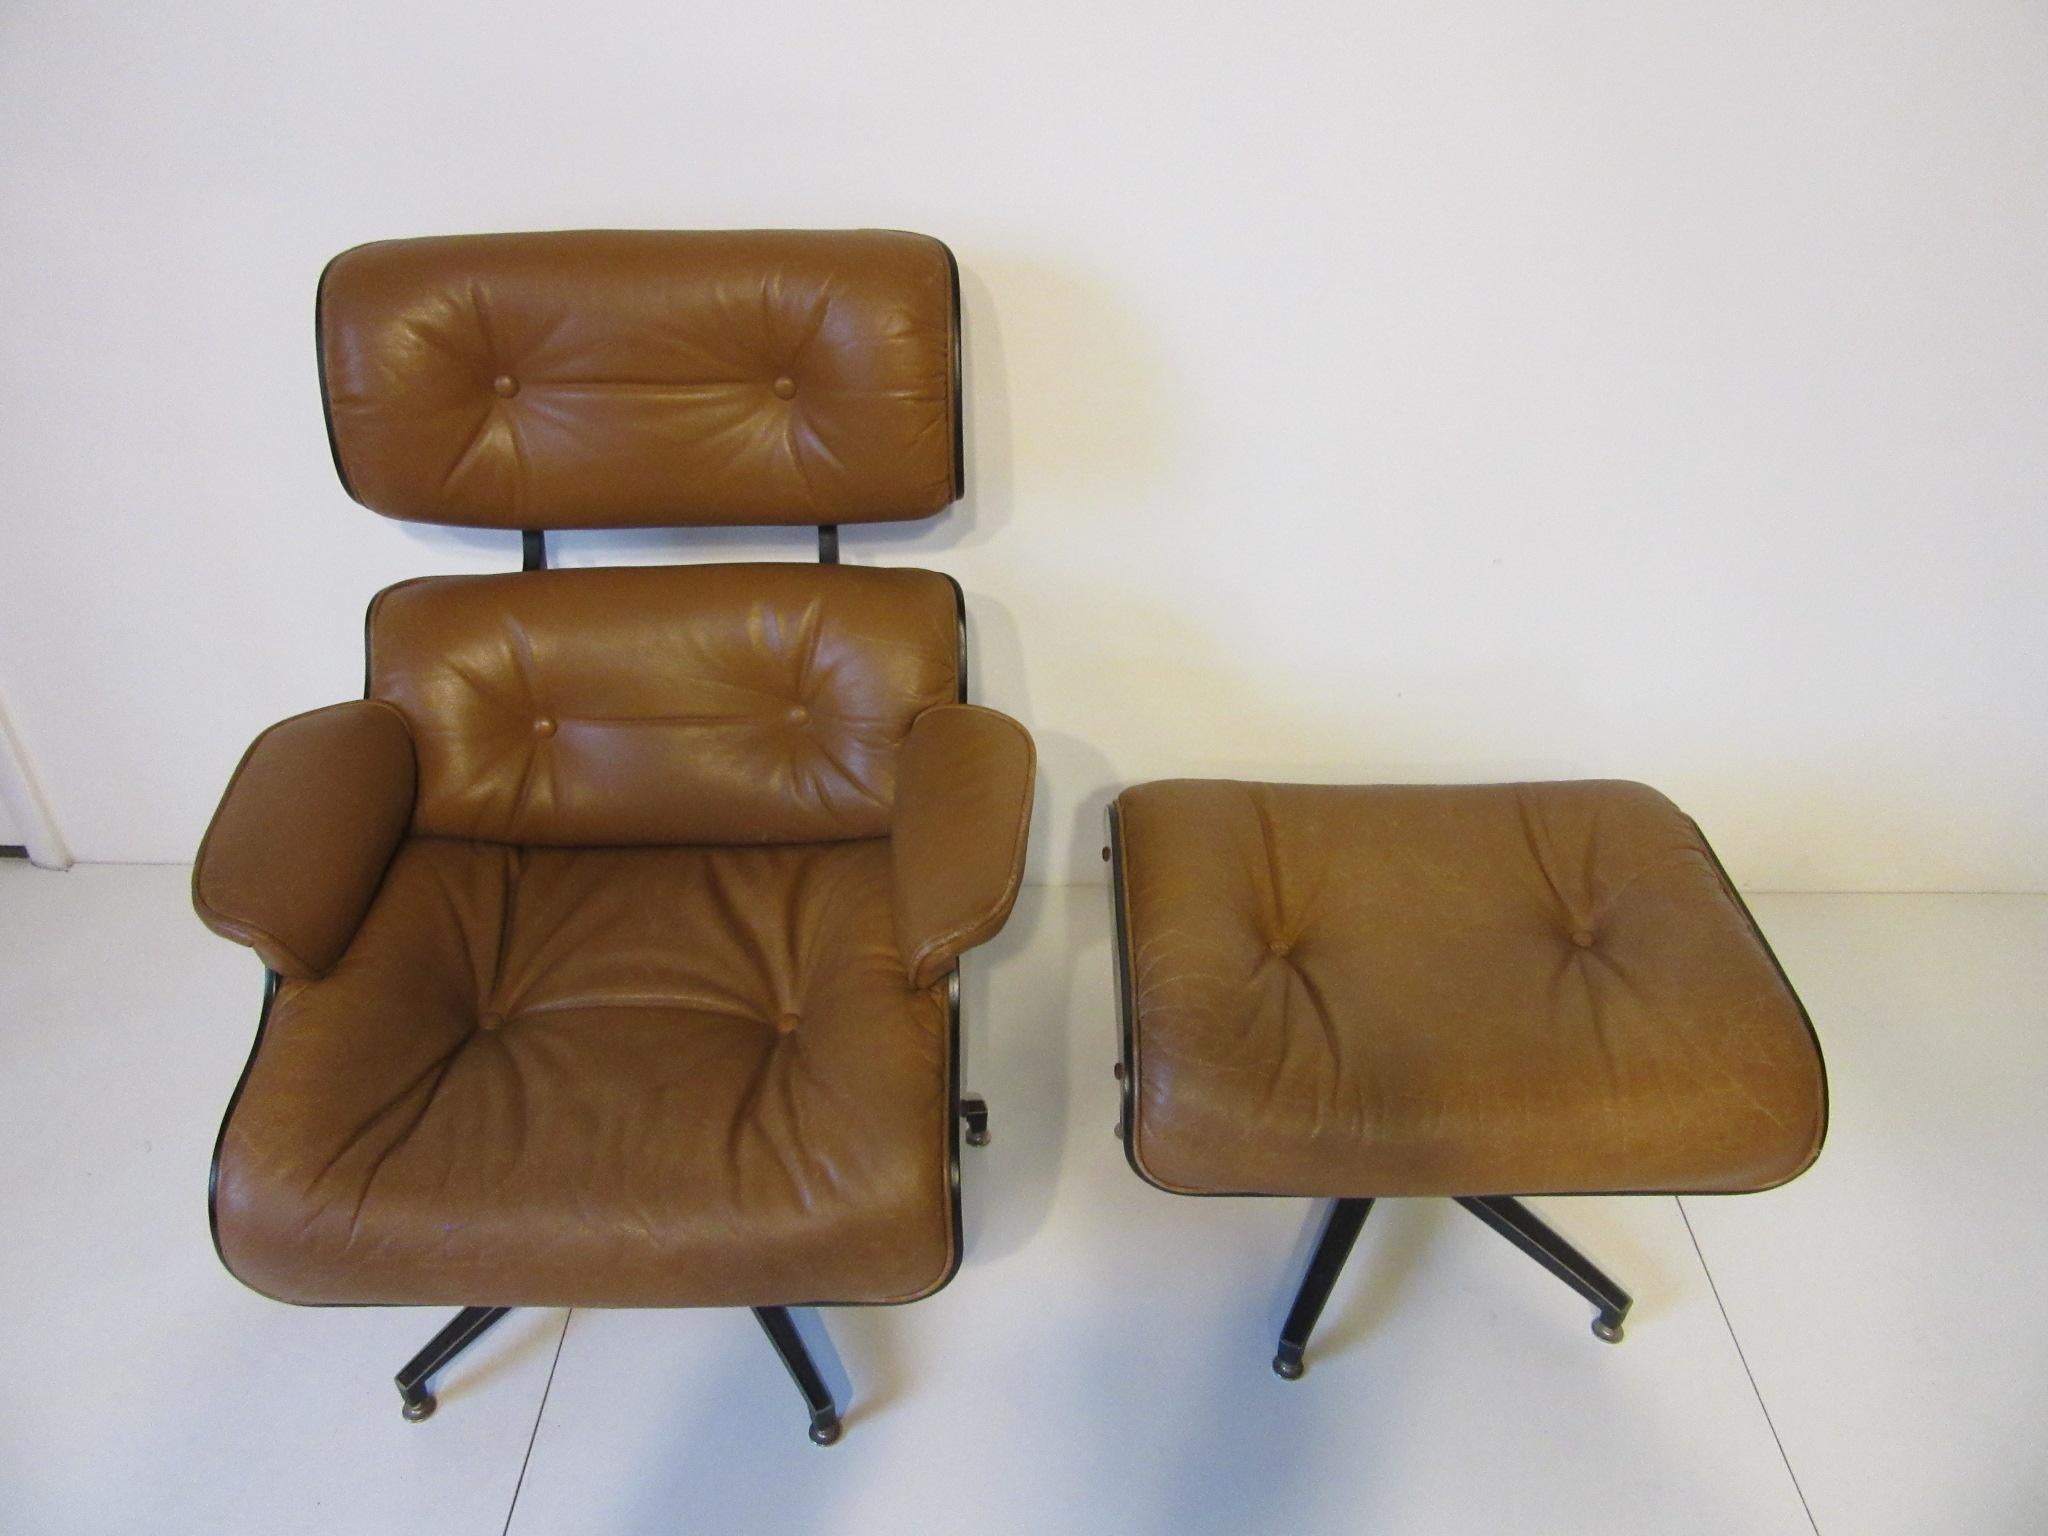 Selig Leather Lounge Chair or Ottoman in the style of Eames or Herman Miller 2